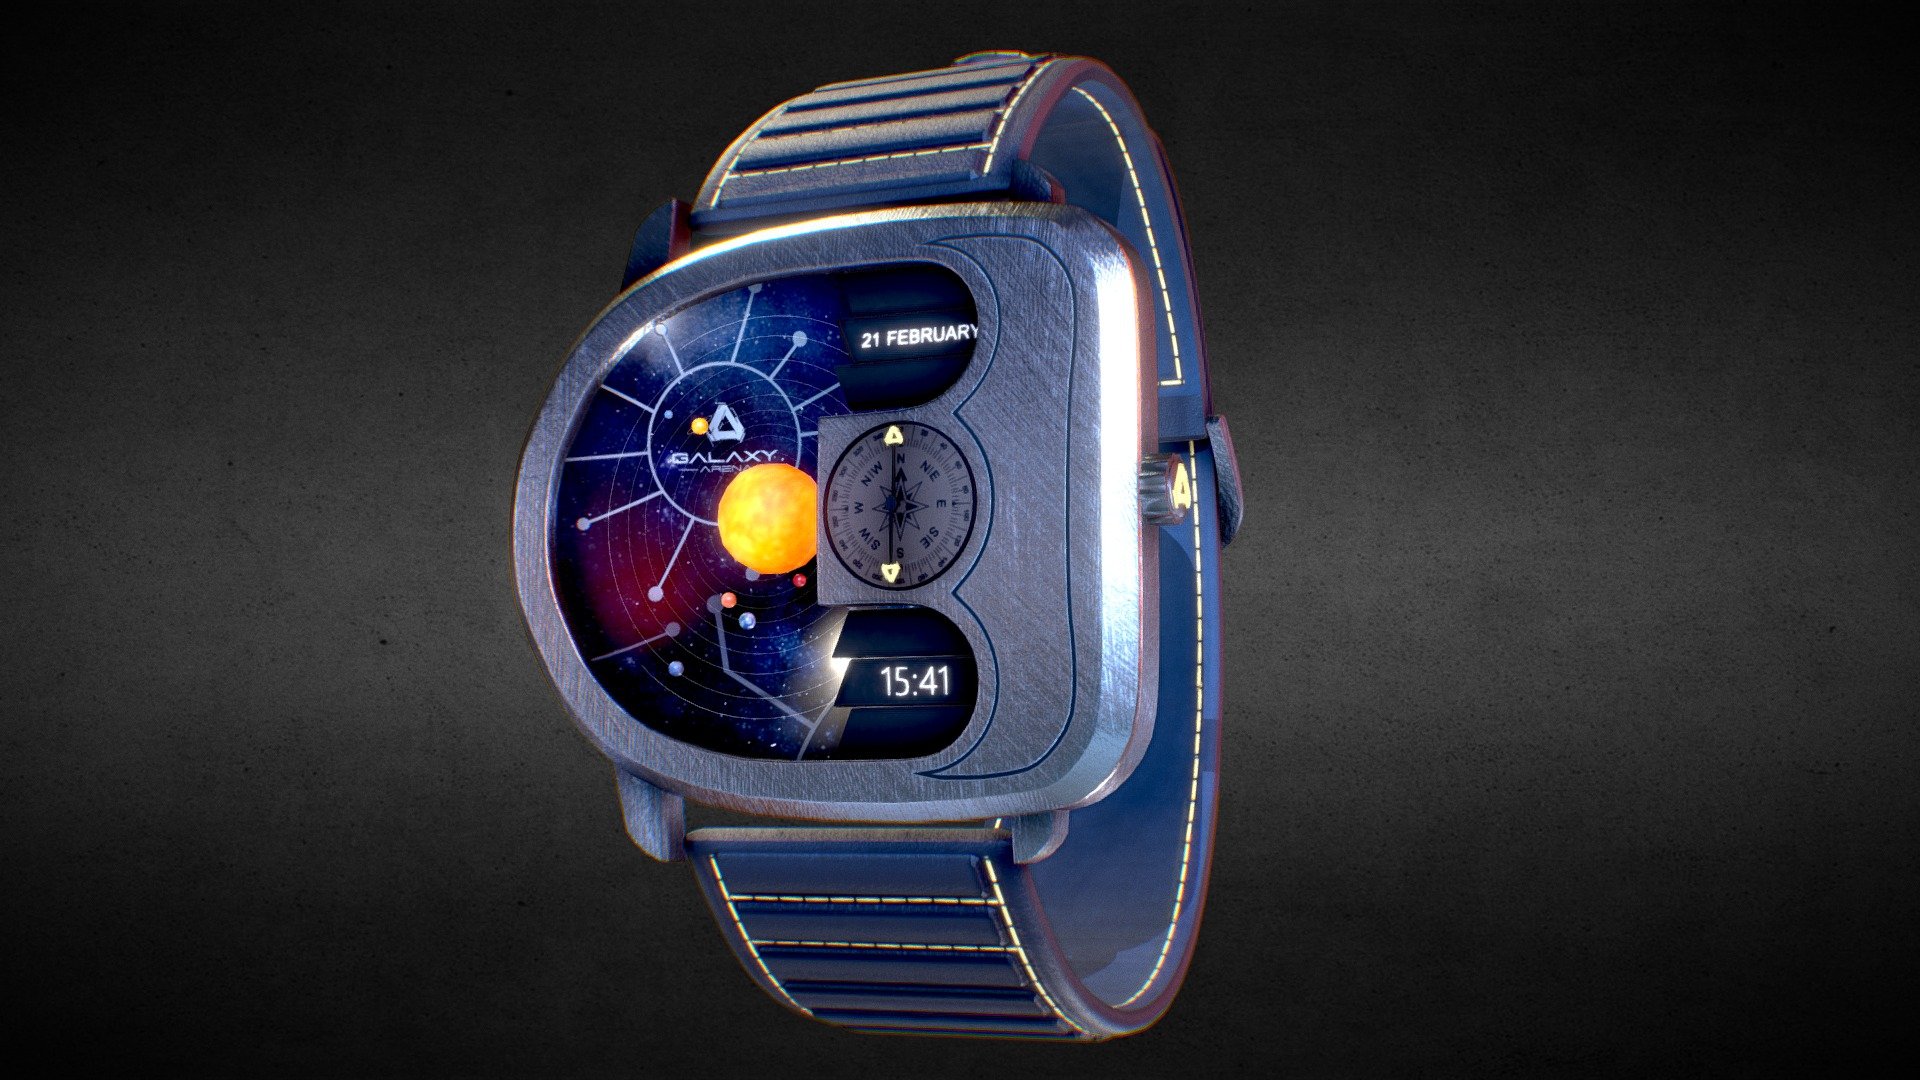 Awersome stainless steel Galaxy Arena Watch.

Currently available for download in FBX format.

3D model developed by AR-Watches 3d model